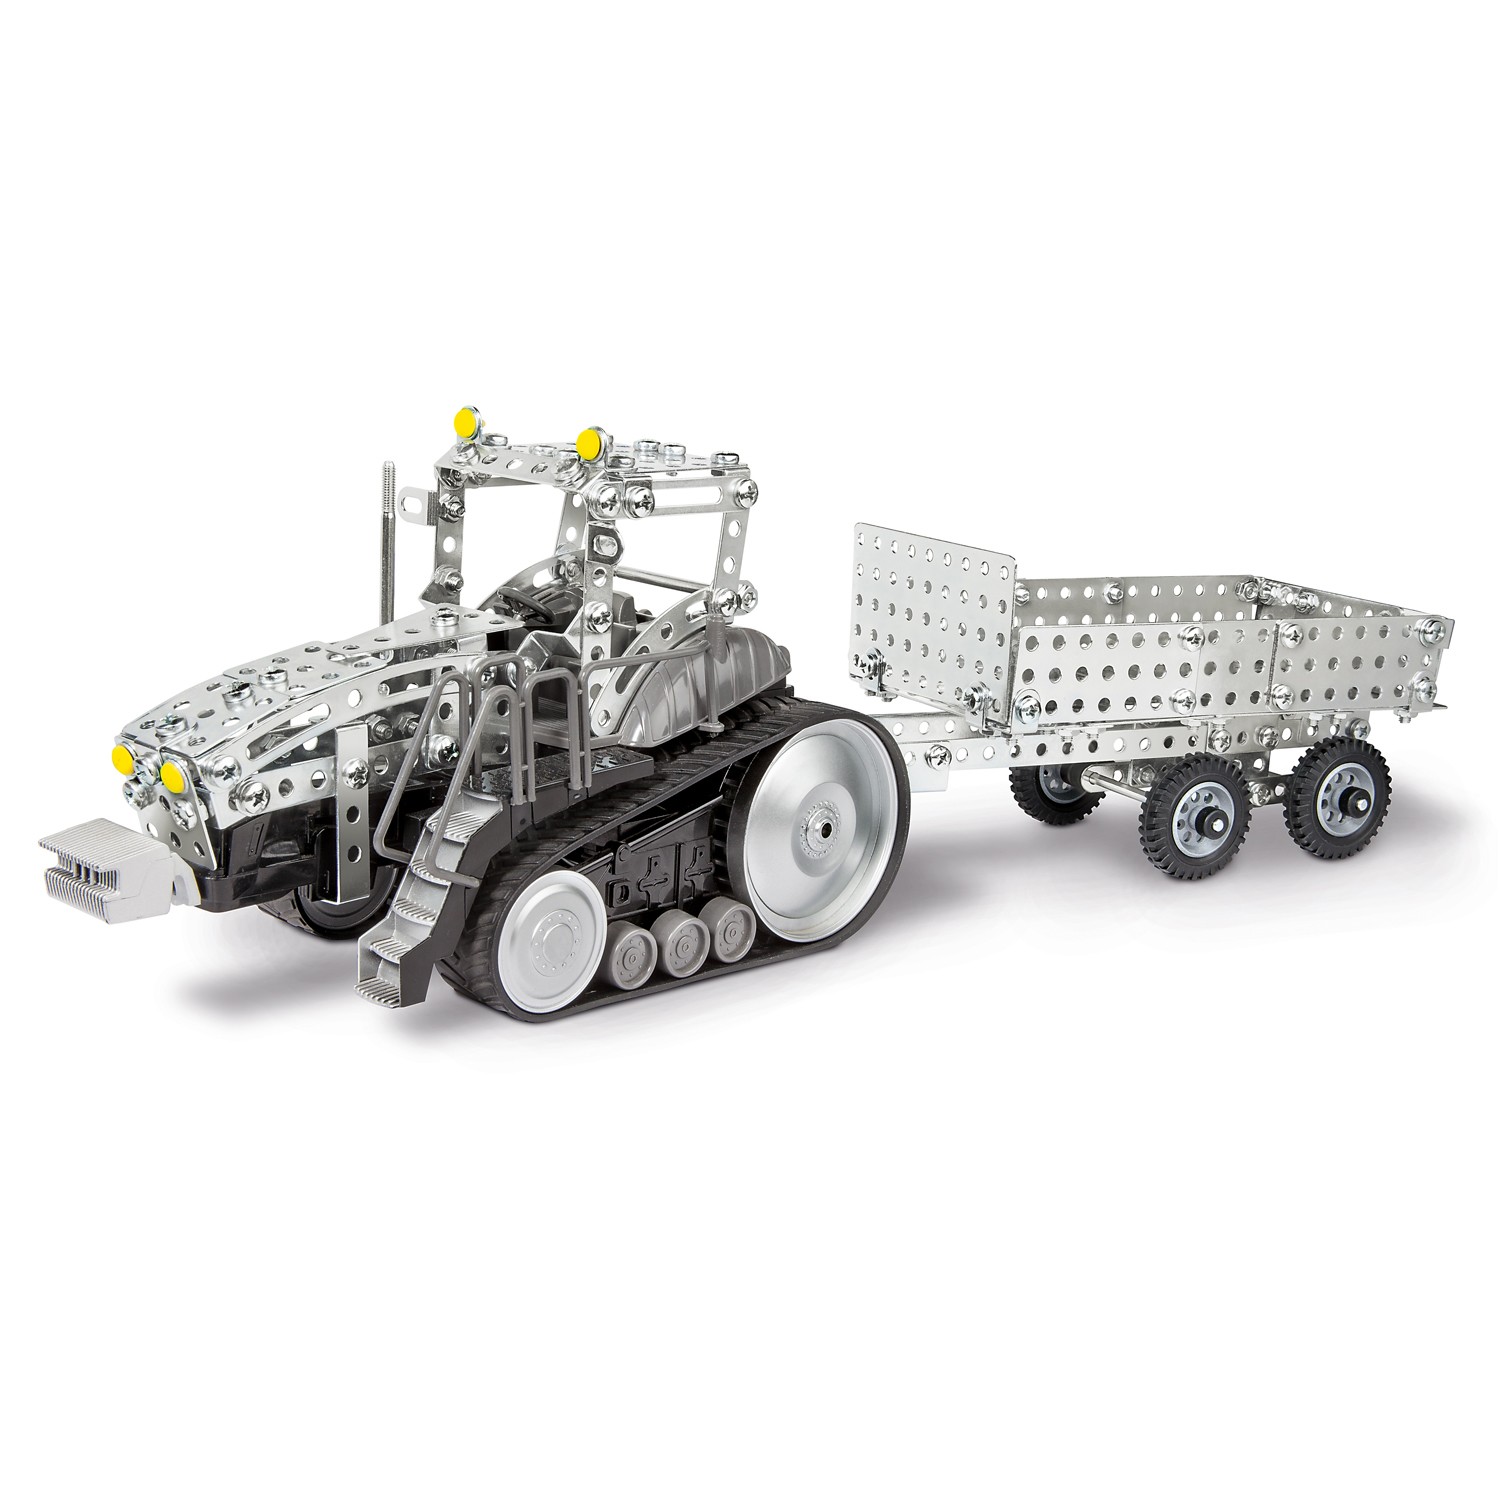 Tractor With Trailer Eitech C81 Metal Building Construction Toy Steel Model Kit 